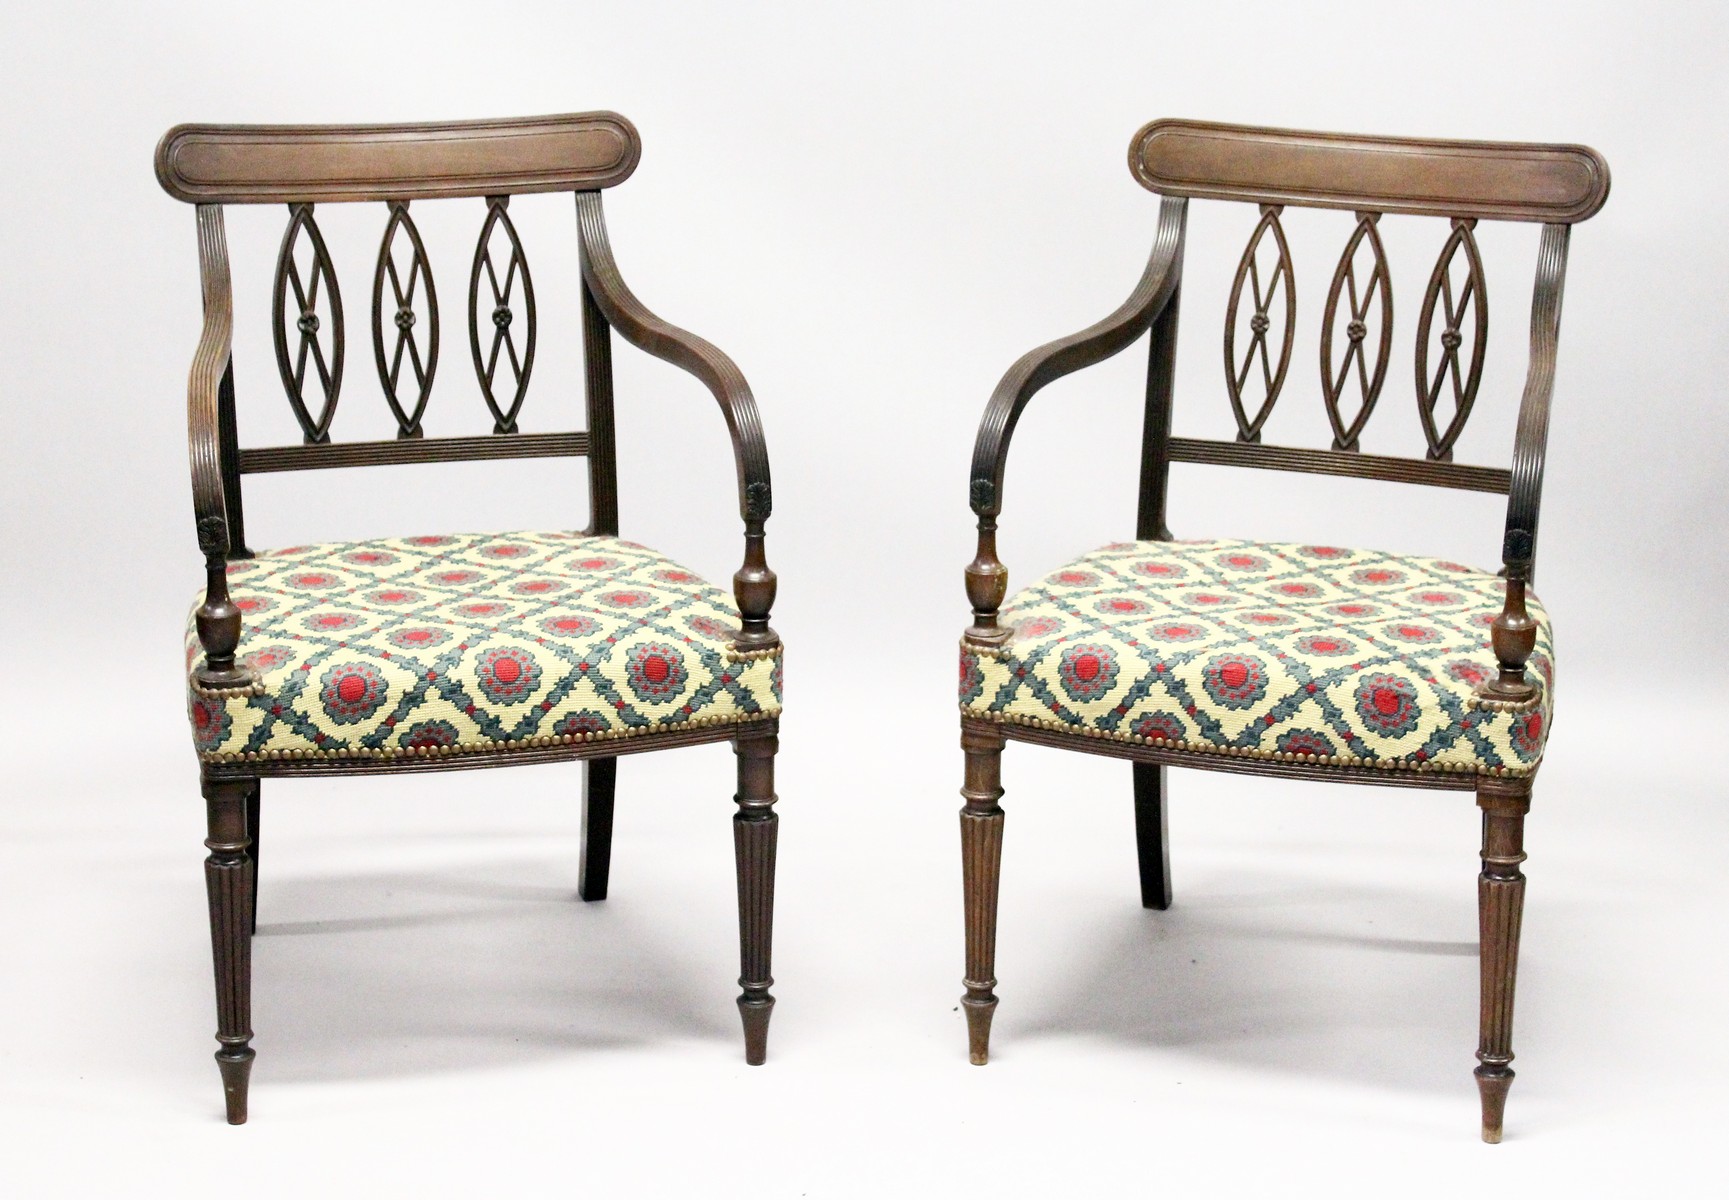 A GOOD PAIR OF REGENCY MAHOGANY ARMCHAIRS, with triple pierced oval splats, reeded arms, padded